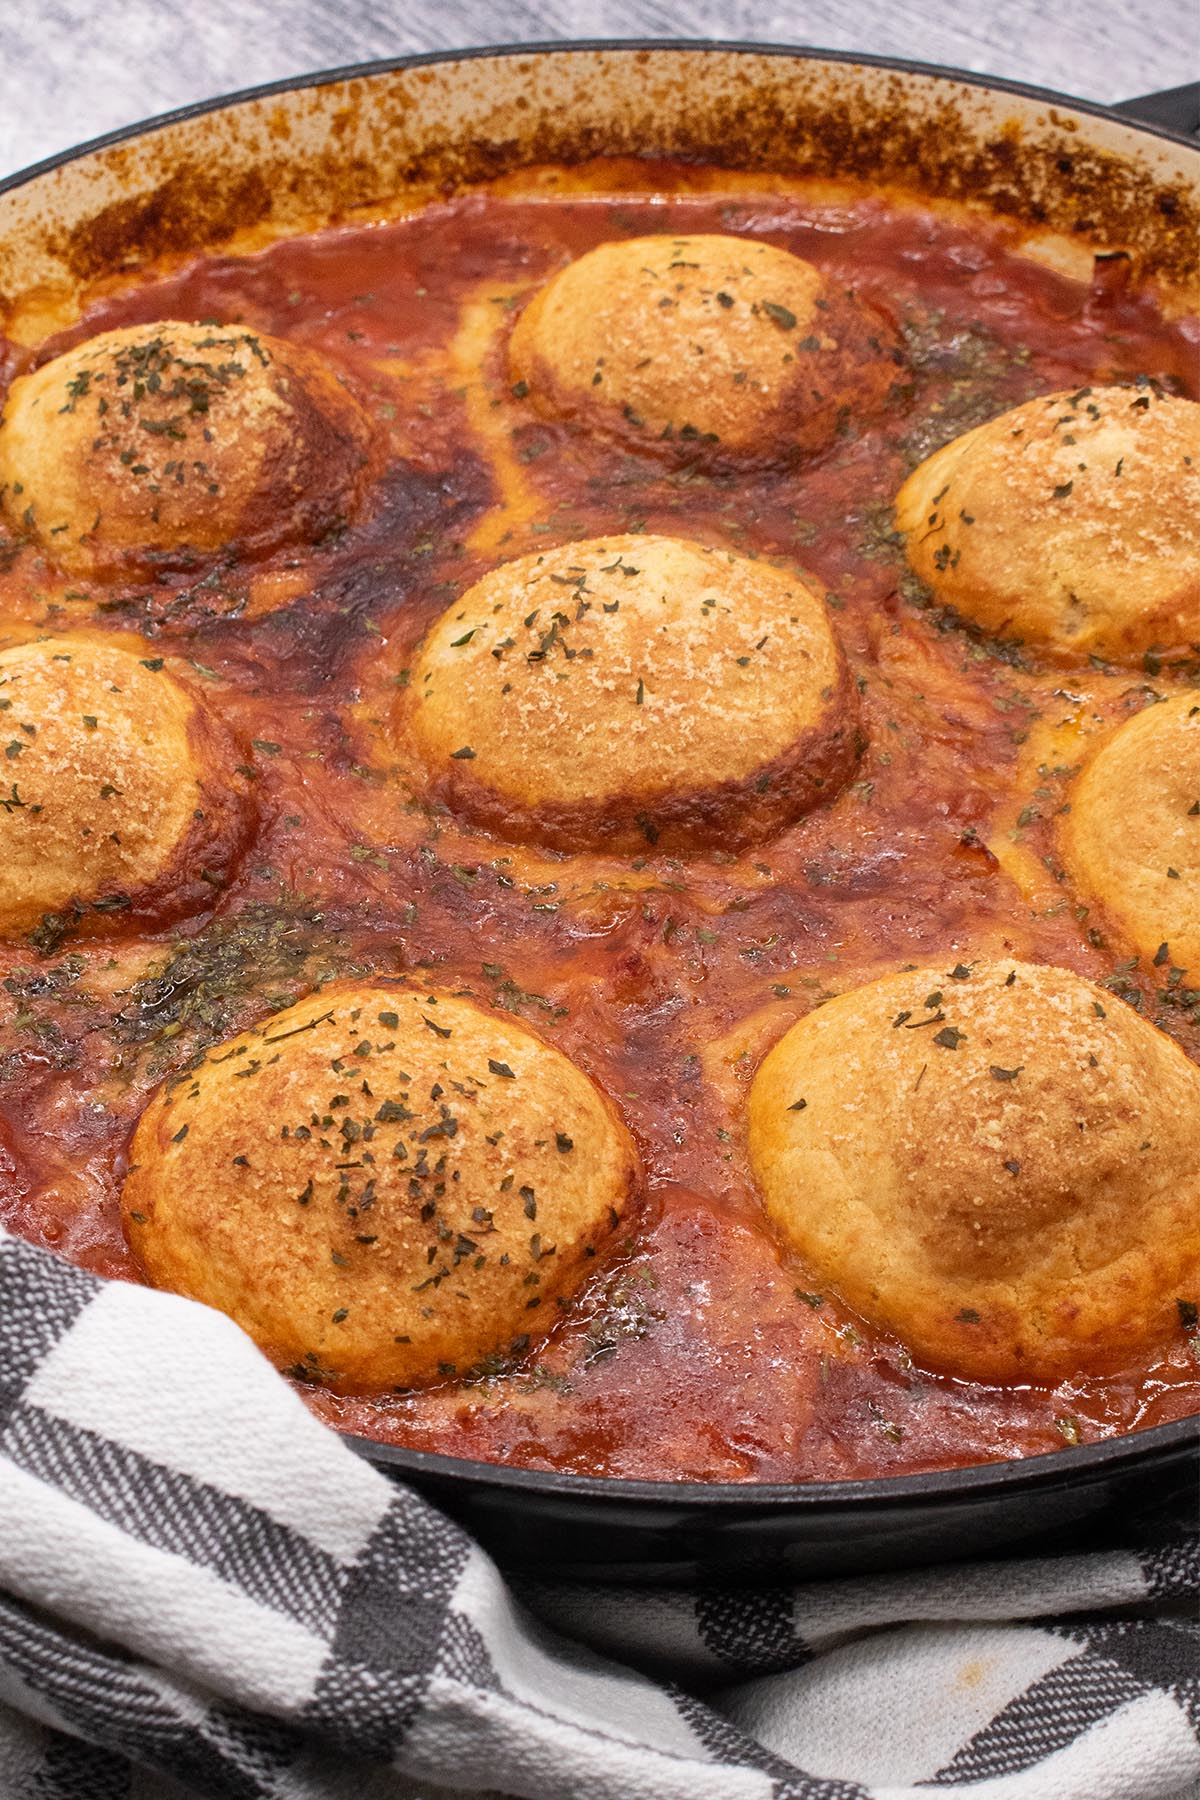 Chicken arrabbiata stew and parmesan dumplings in round casserole dish with black and white towel